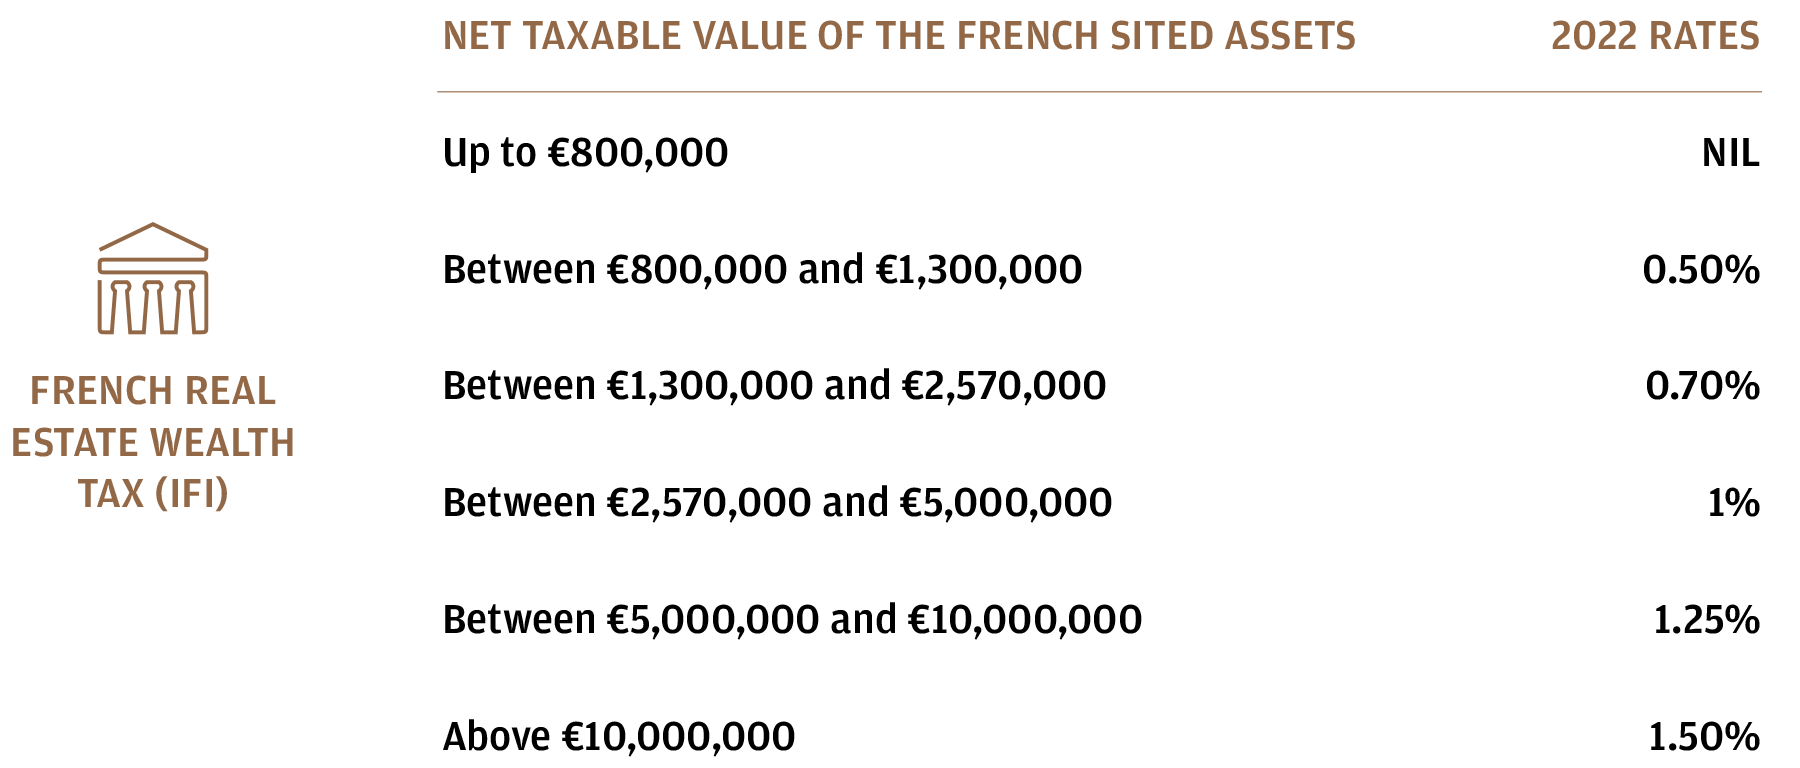 Net taxable value of the French sited assets